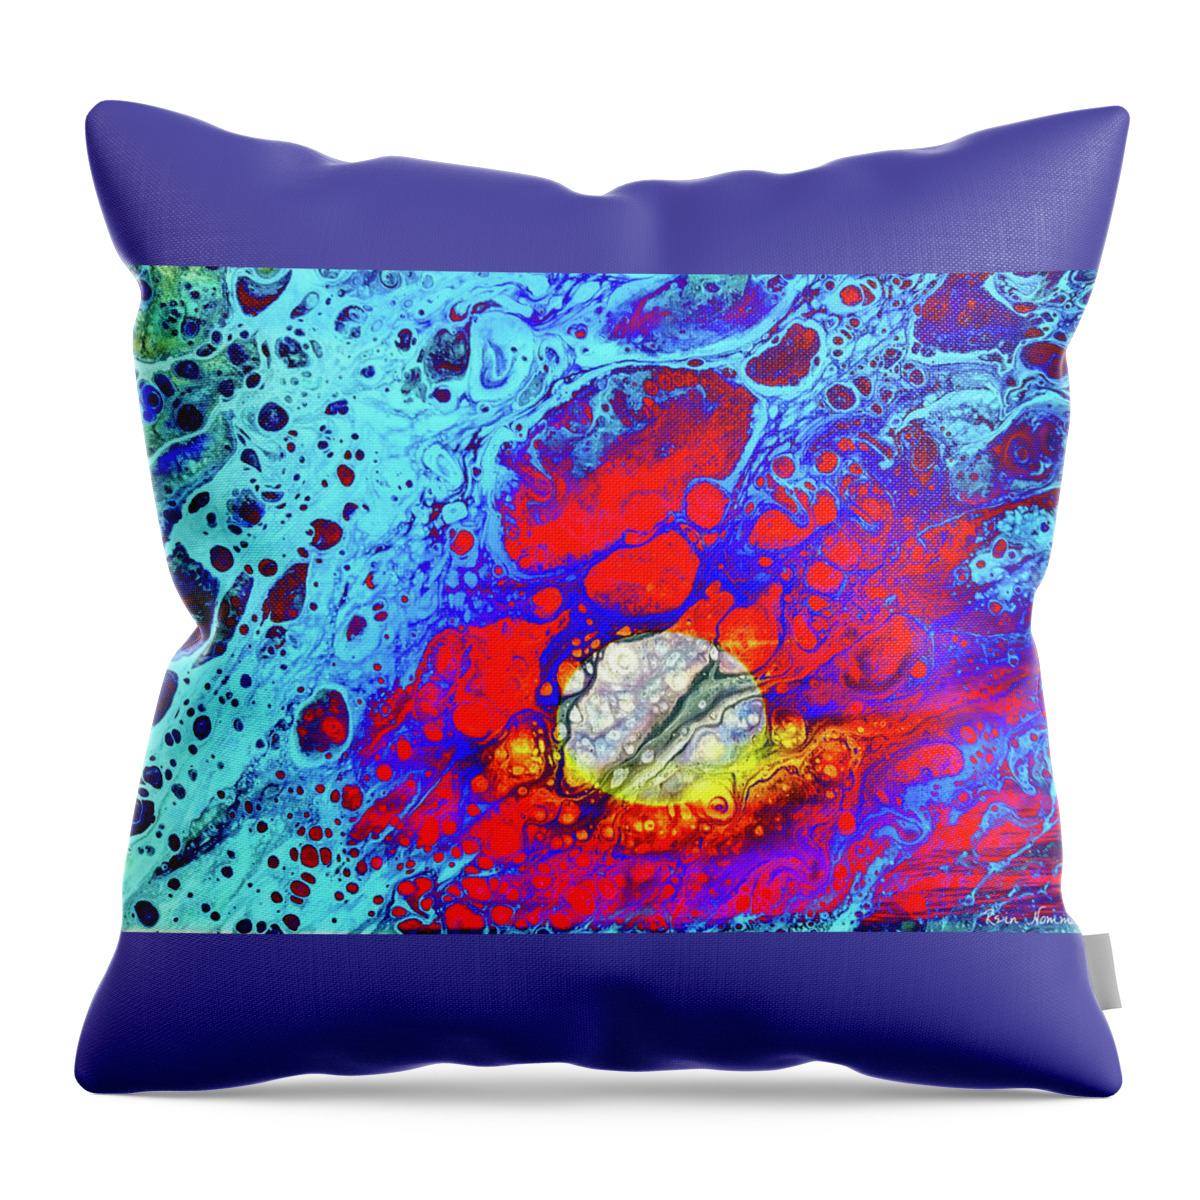  Throw Pillow featuring the mixed media The Sun Also Sets by Rein Nomm